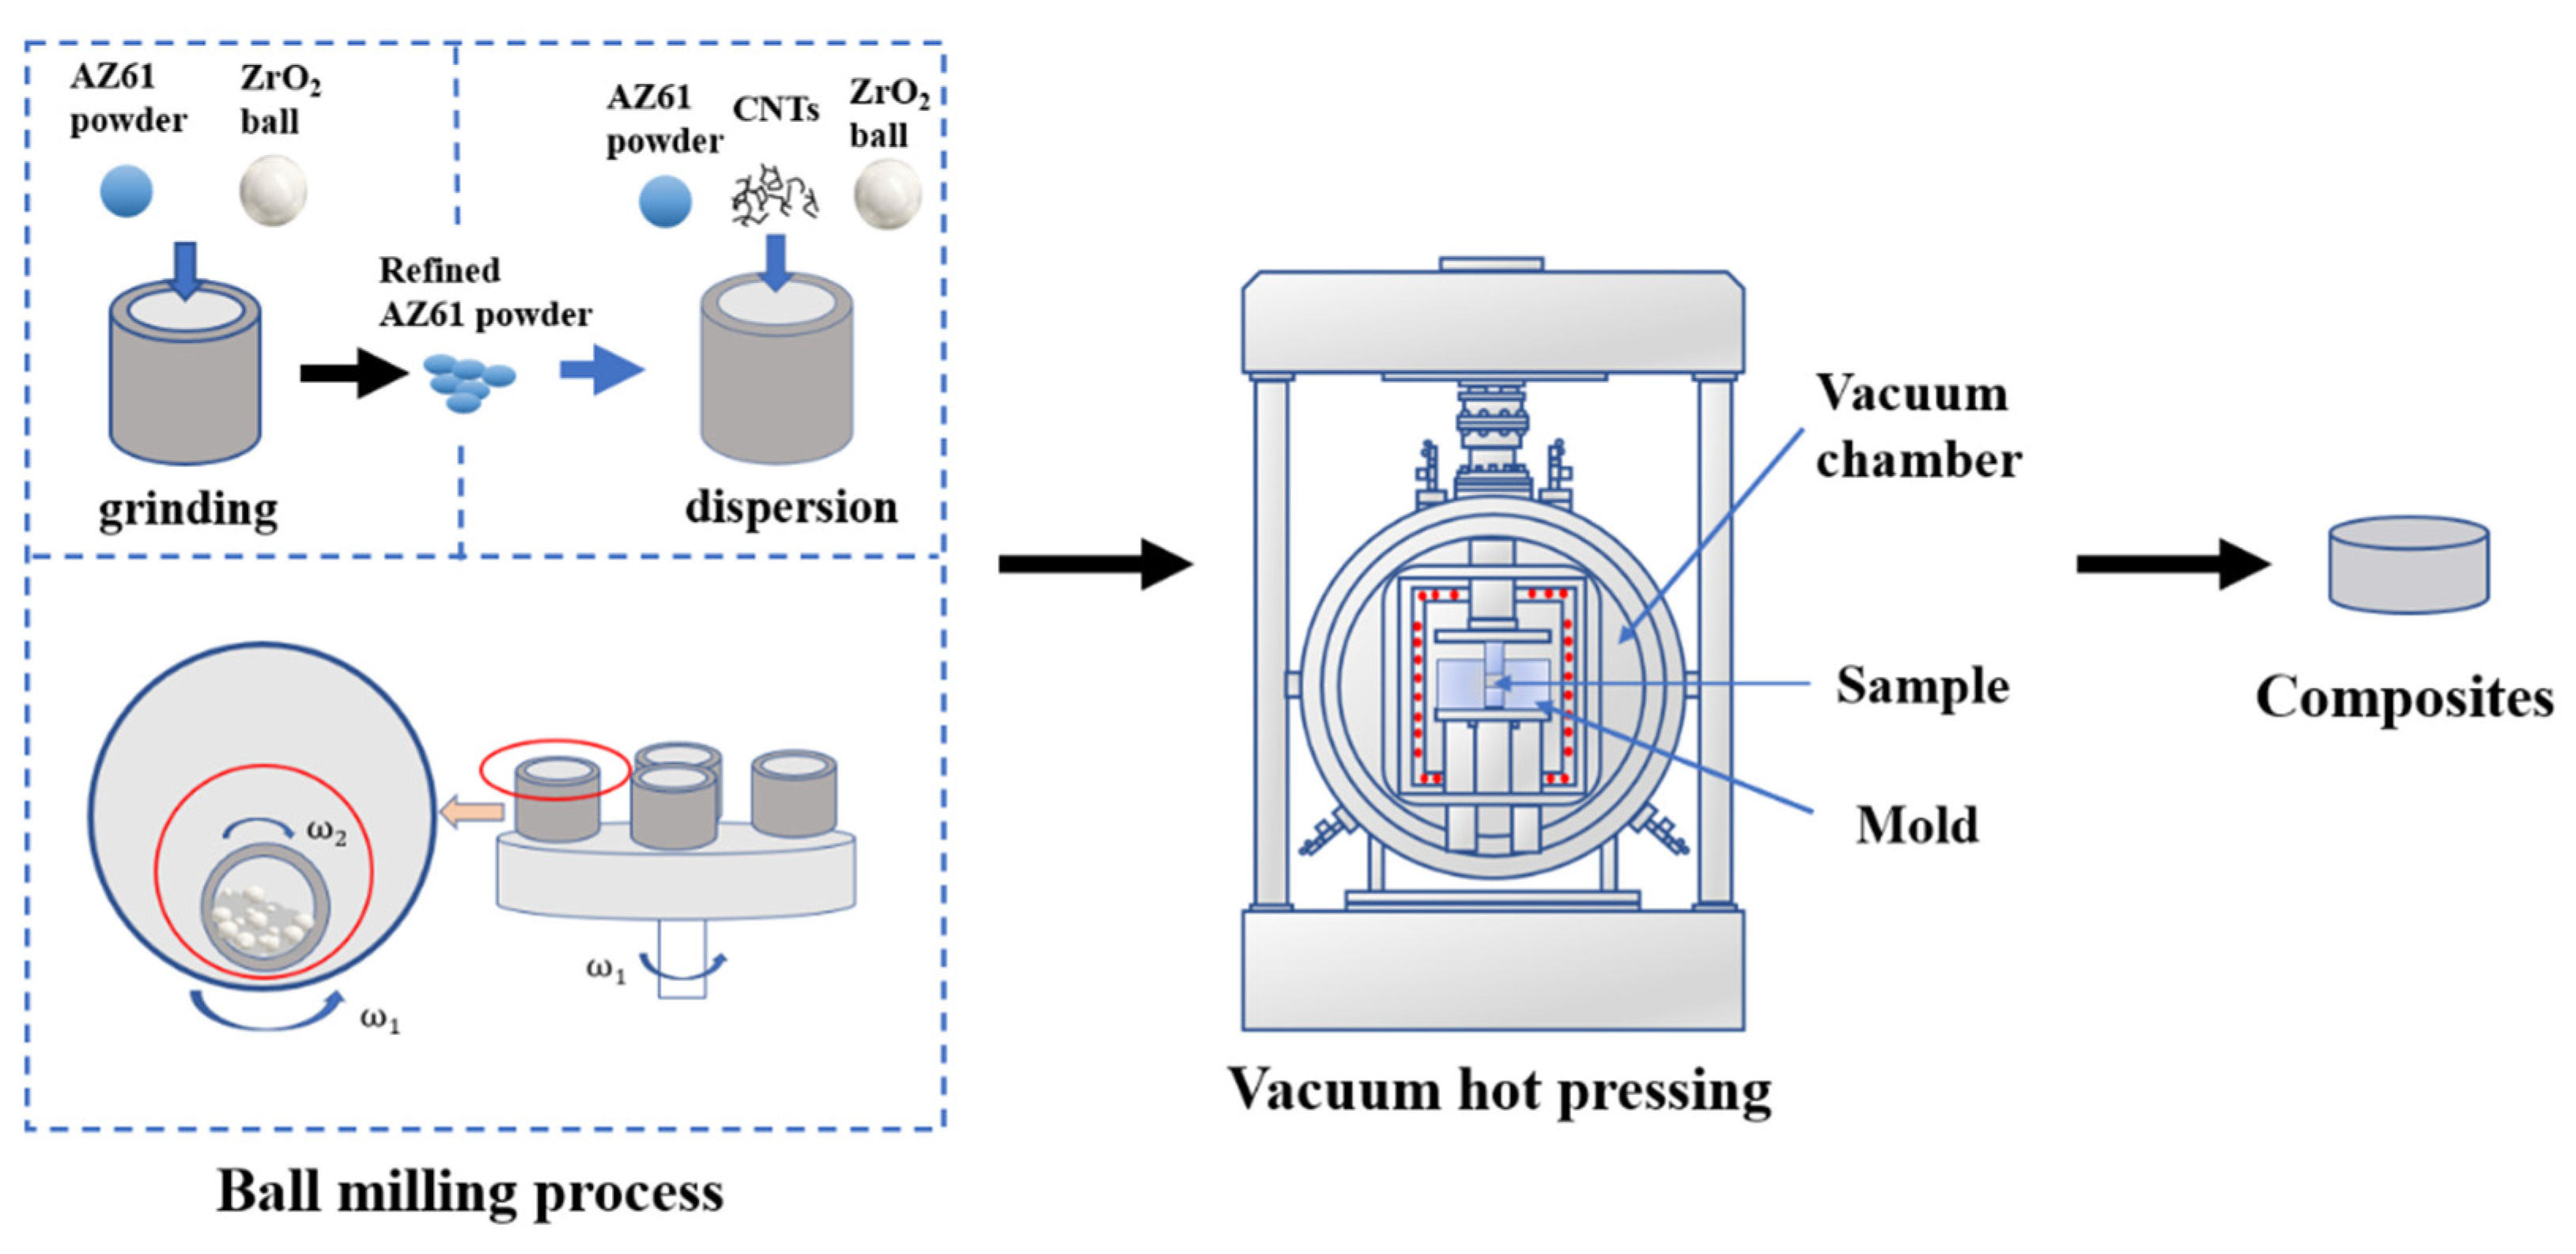 Controlling vibrator. Catalytic properties of nanotubes. Flowsheet grinding. Separation of heterogeneous Systems under the influence of Centrifugal Force.